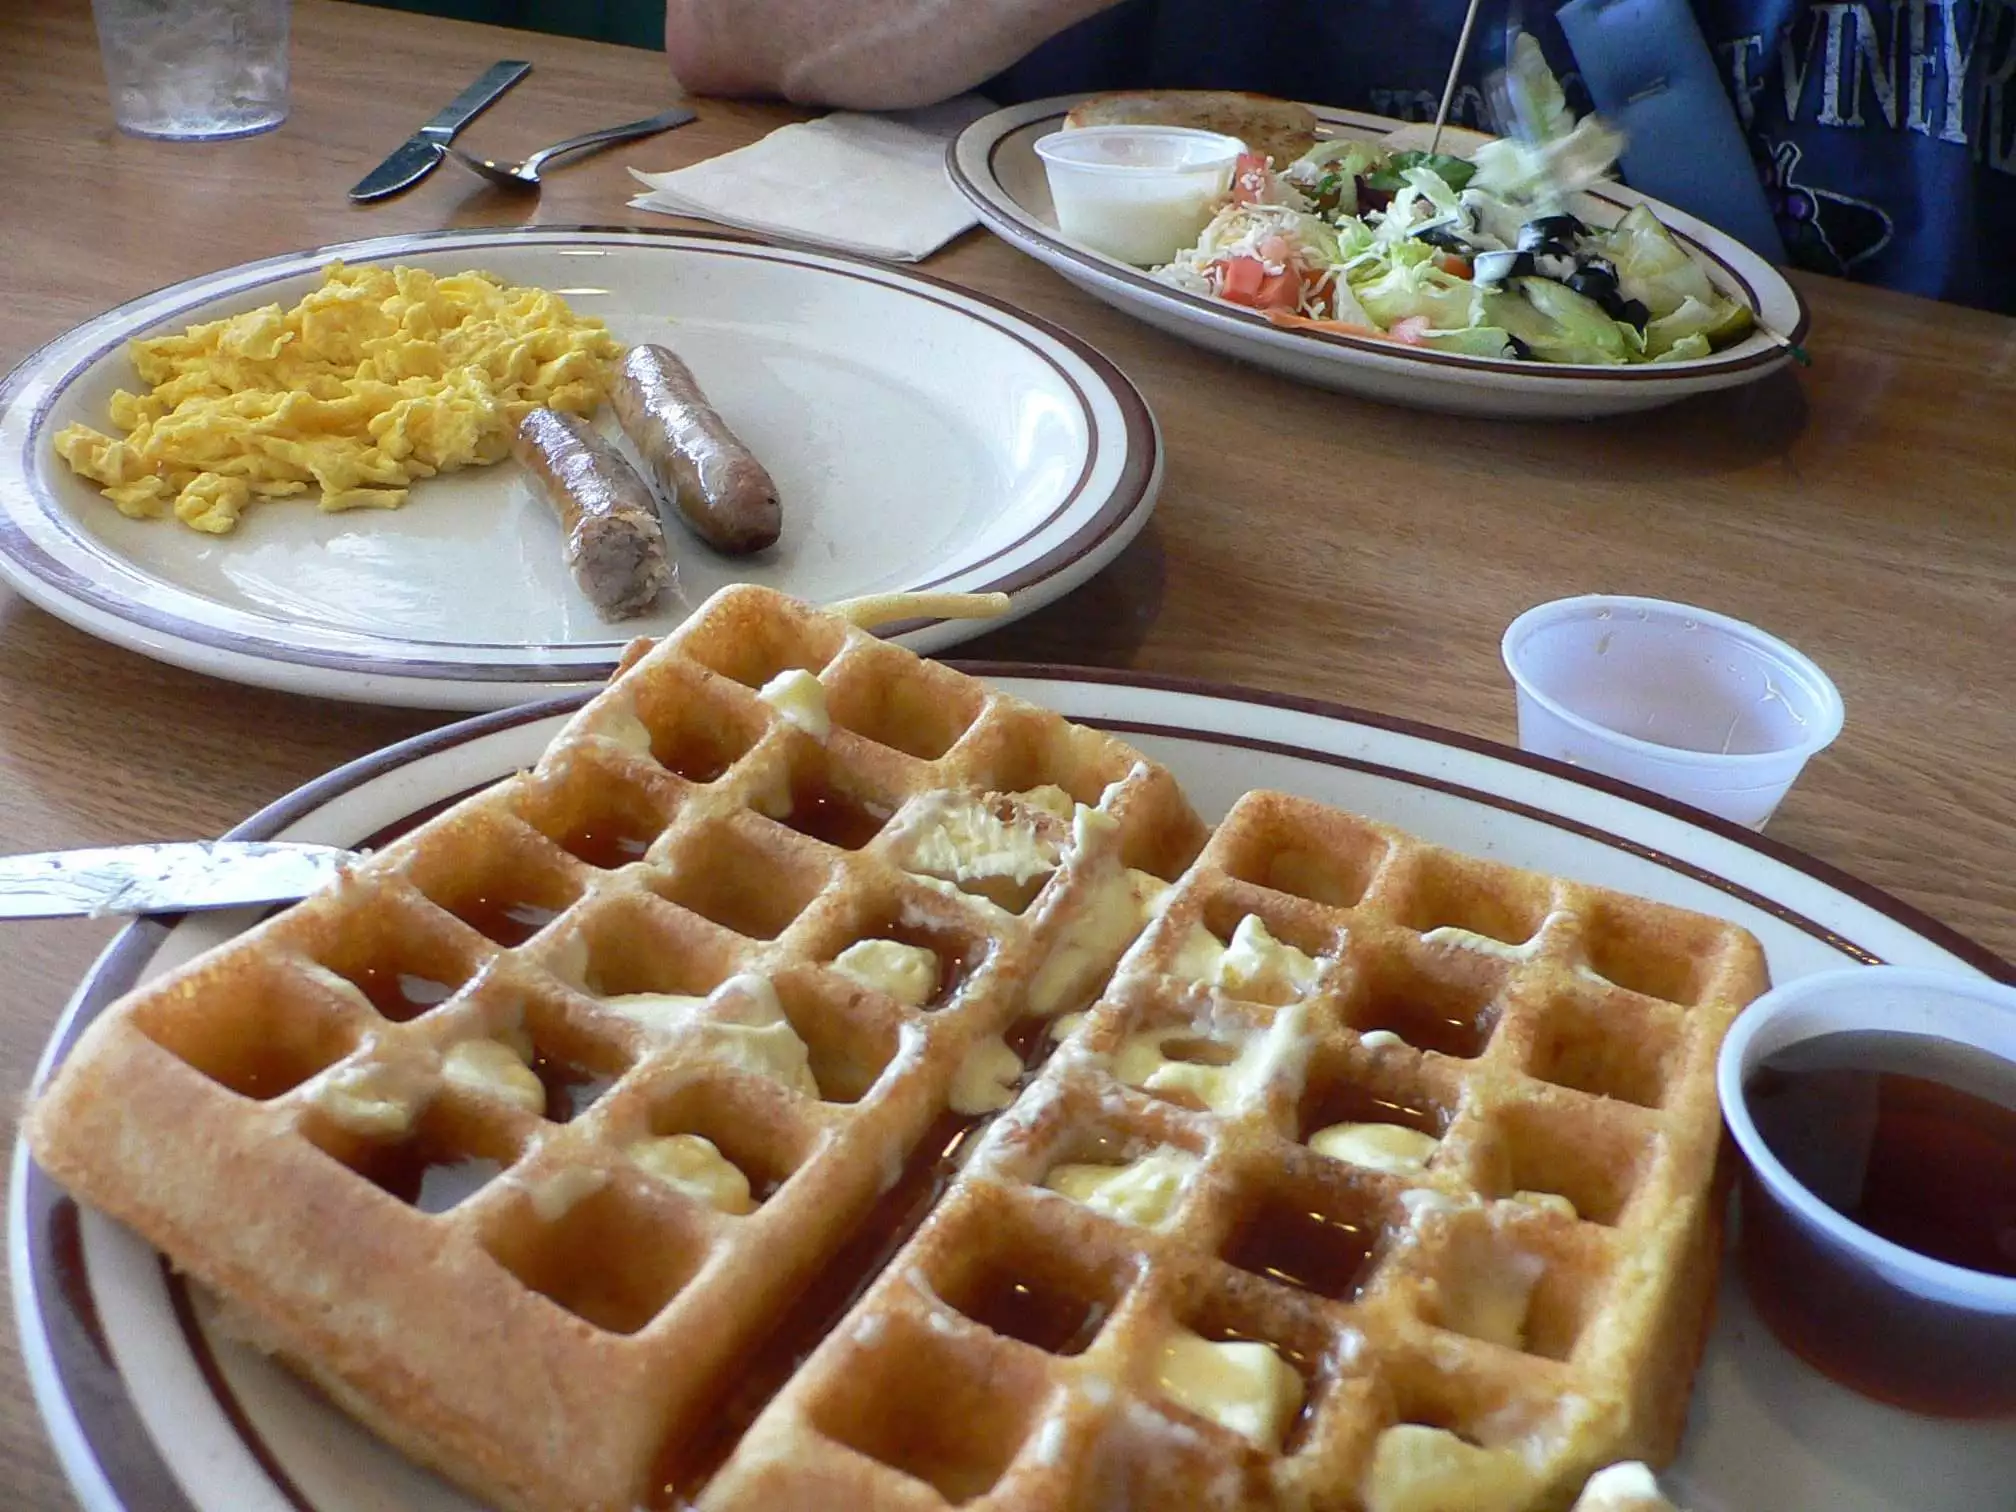 Brunch in one of the best restaurants in Sacramento, Waffle Square